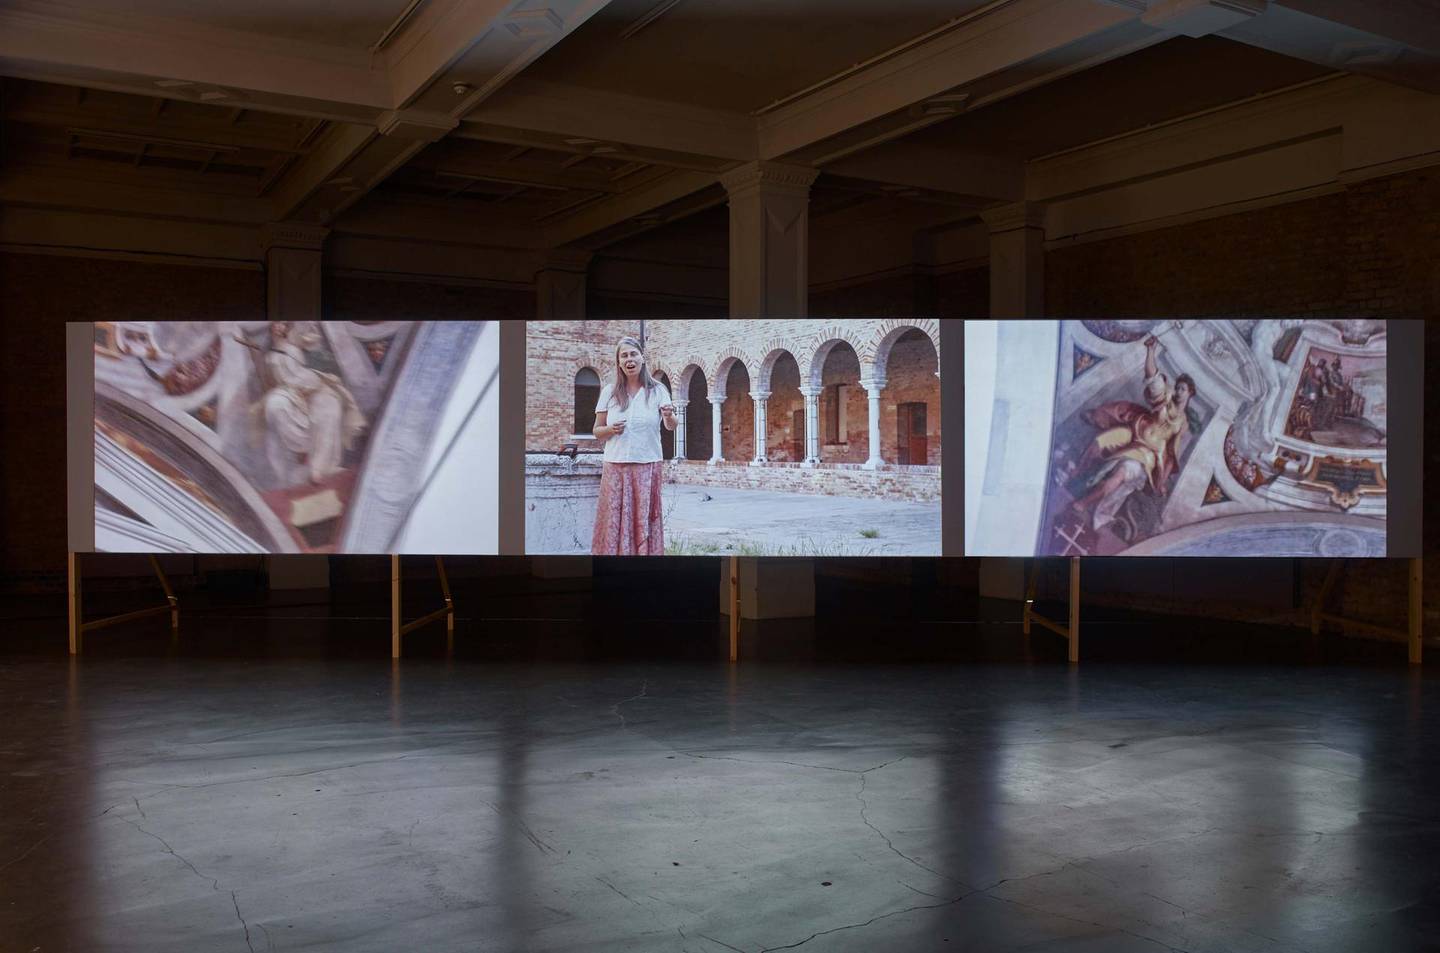 Installation view, Helen Cammock Che si può fare at Whitechapel Gallery. Photo by Stephen White. Courtesy Whitechapel Gallery